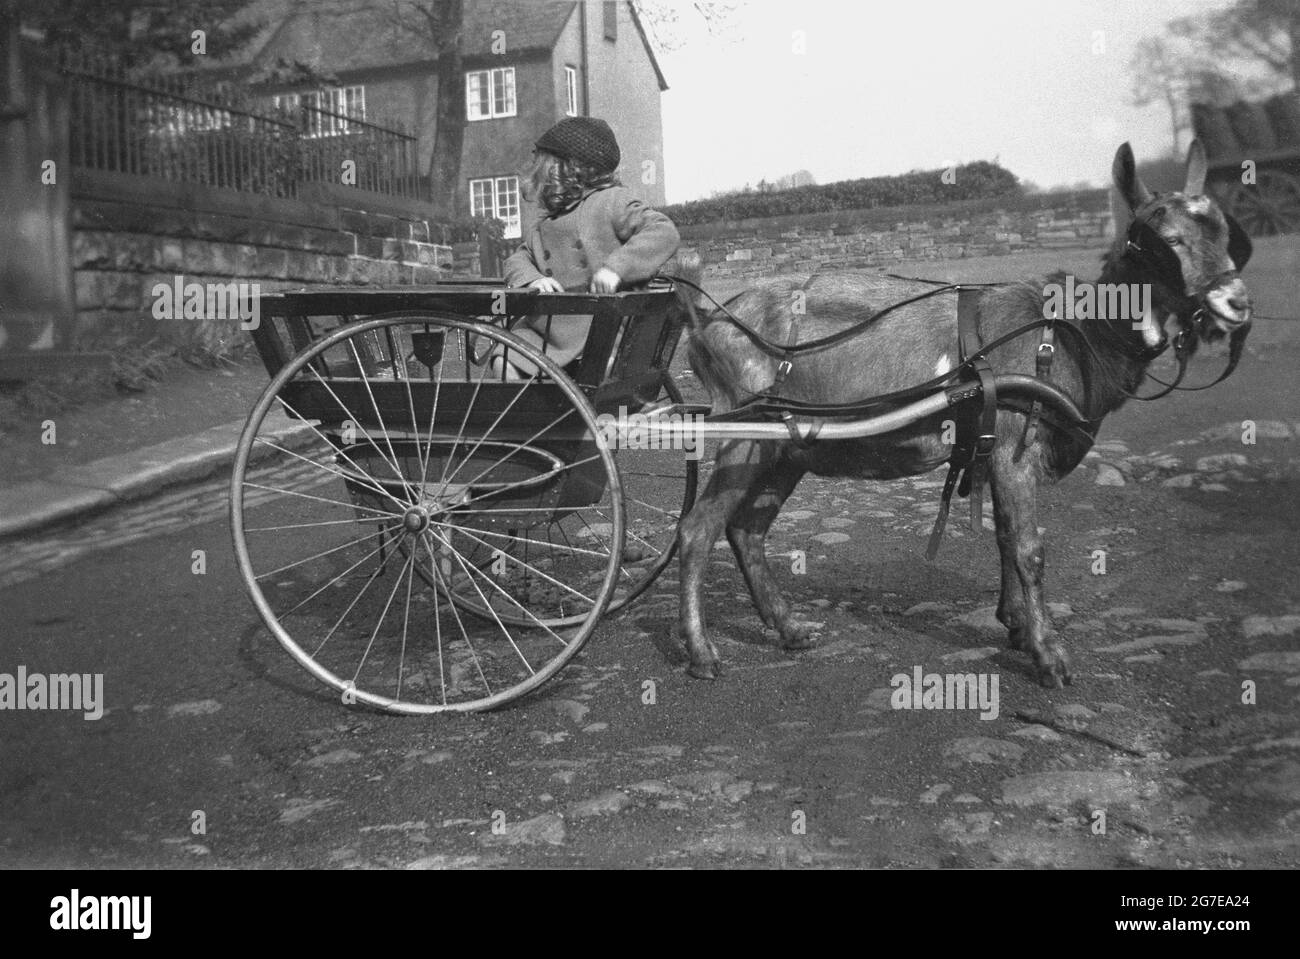 1920s, historical, a young child in a coat sittmg in a two-wheeled cart pulled by a goat, England, UK. At this time, it would have been normal to see a goat cart on the streets, particuarly in rural villages. Many families owned a goat cart or carriage for their children to use, from the lower classes all the way up to nobility. Stock Photo